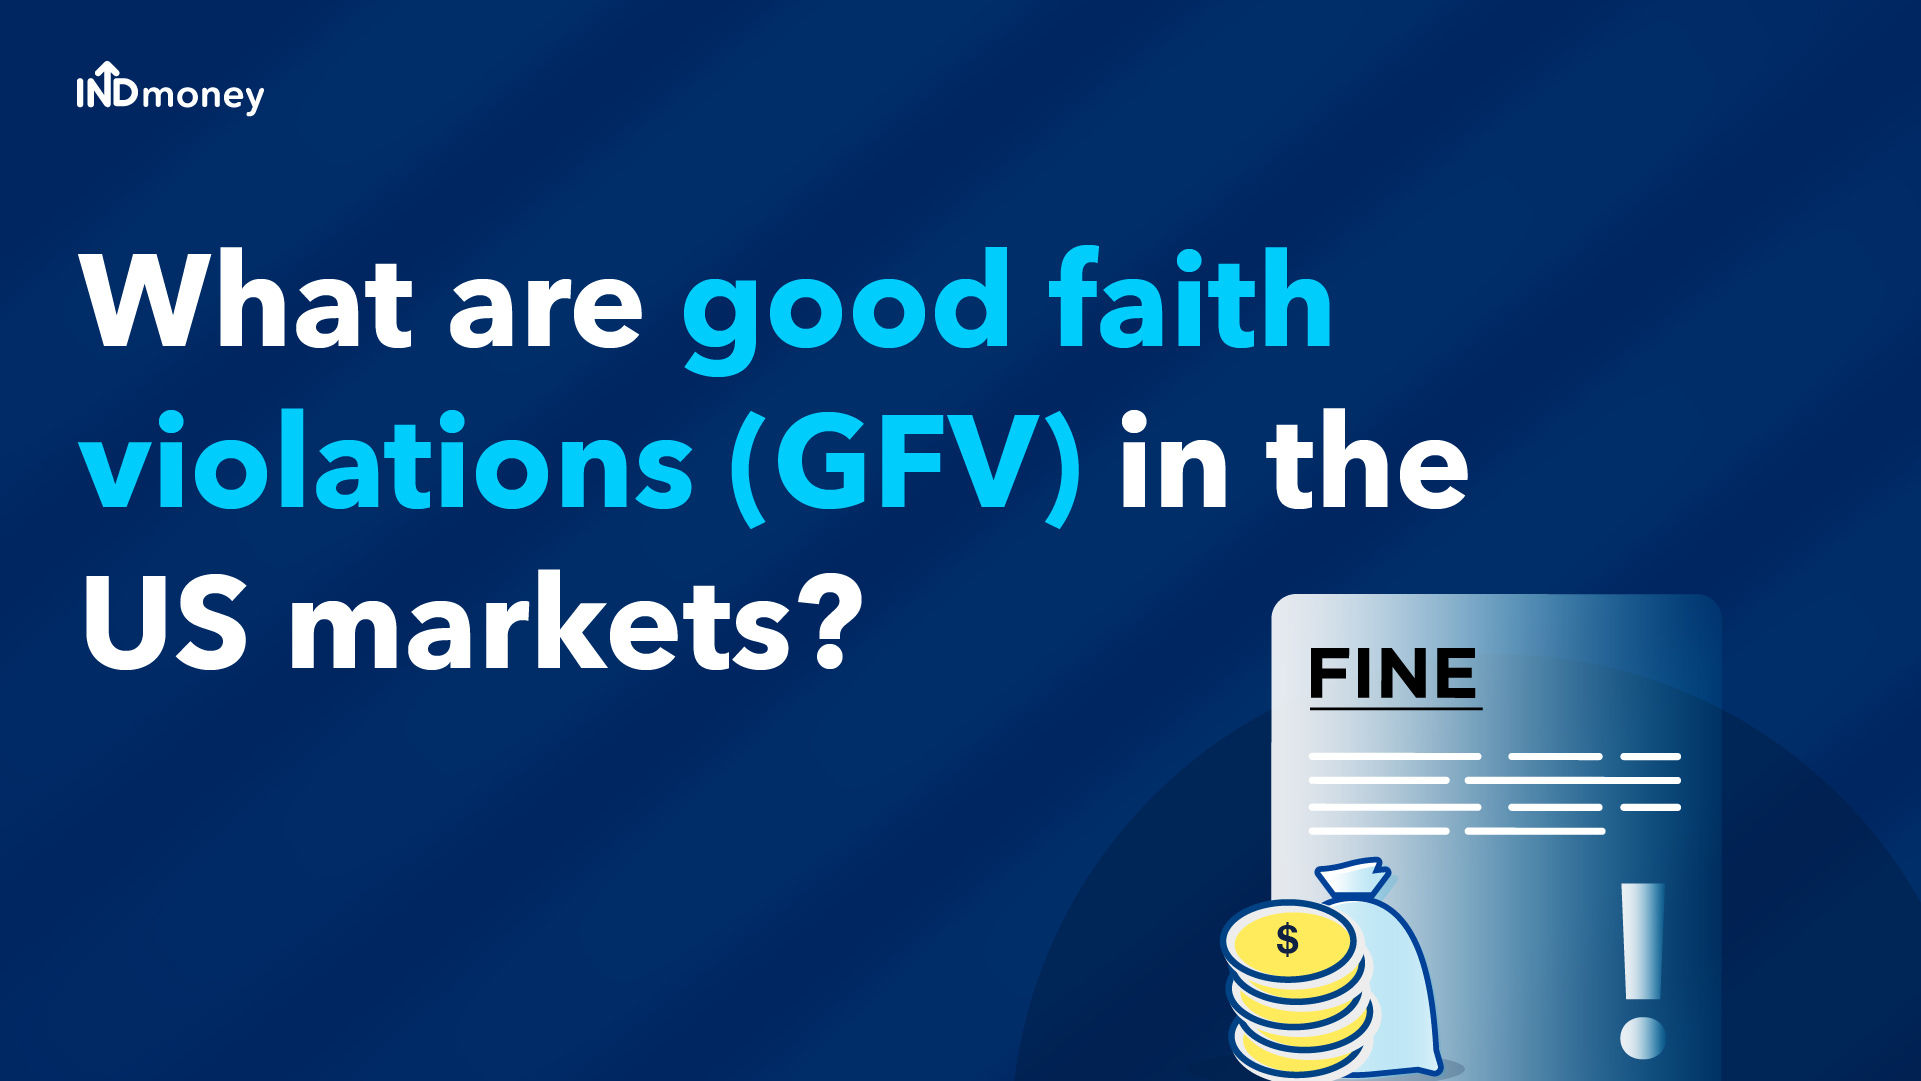 What are good faith violations (GFV) in the US markets?